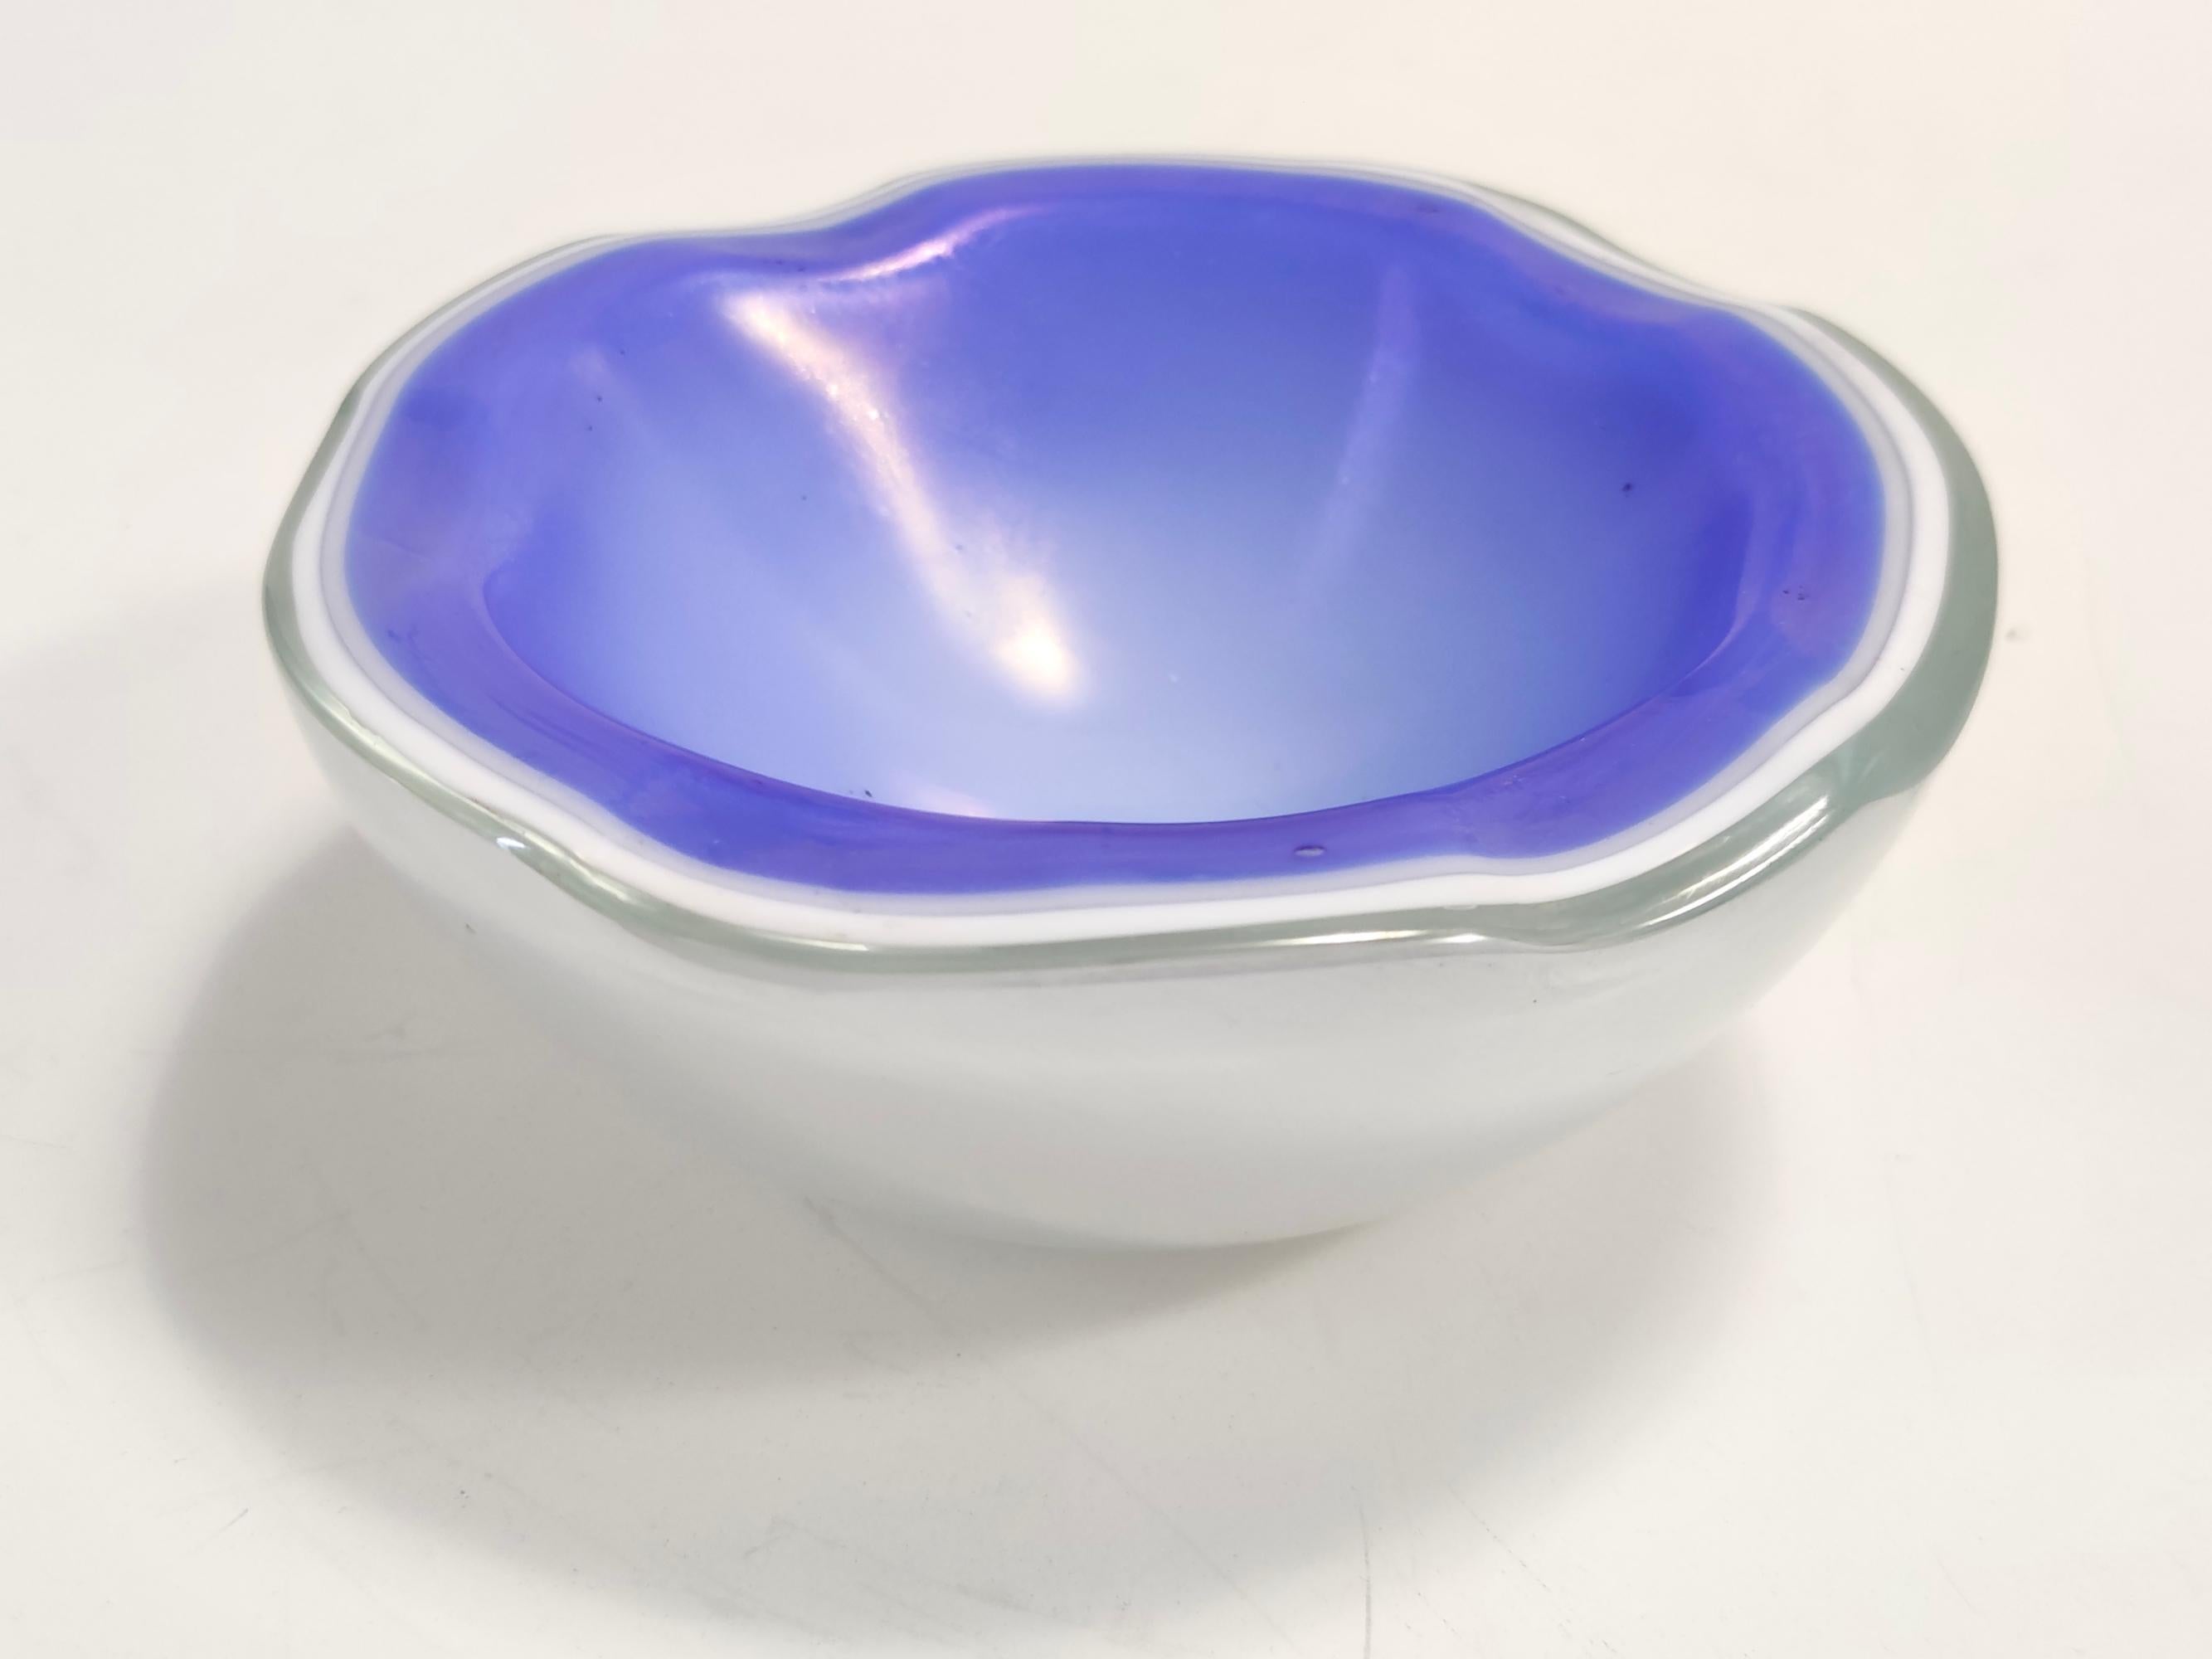 Hand-Crafted Vintage Iridescent Cornflower Blue and White Murano Glass Trinket Bowl - Ashtray For Sale